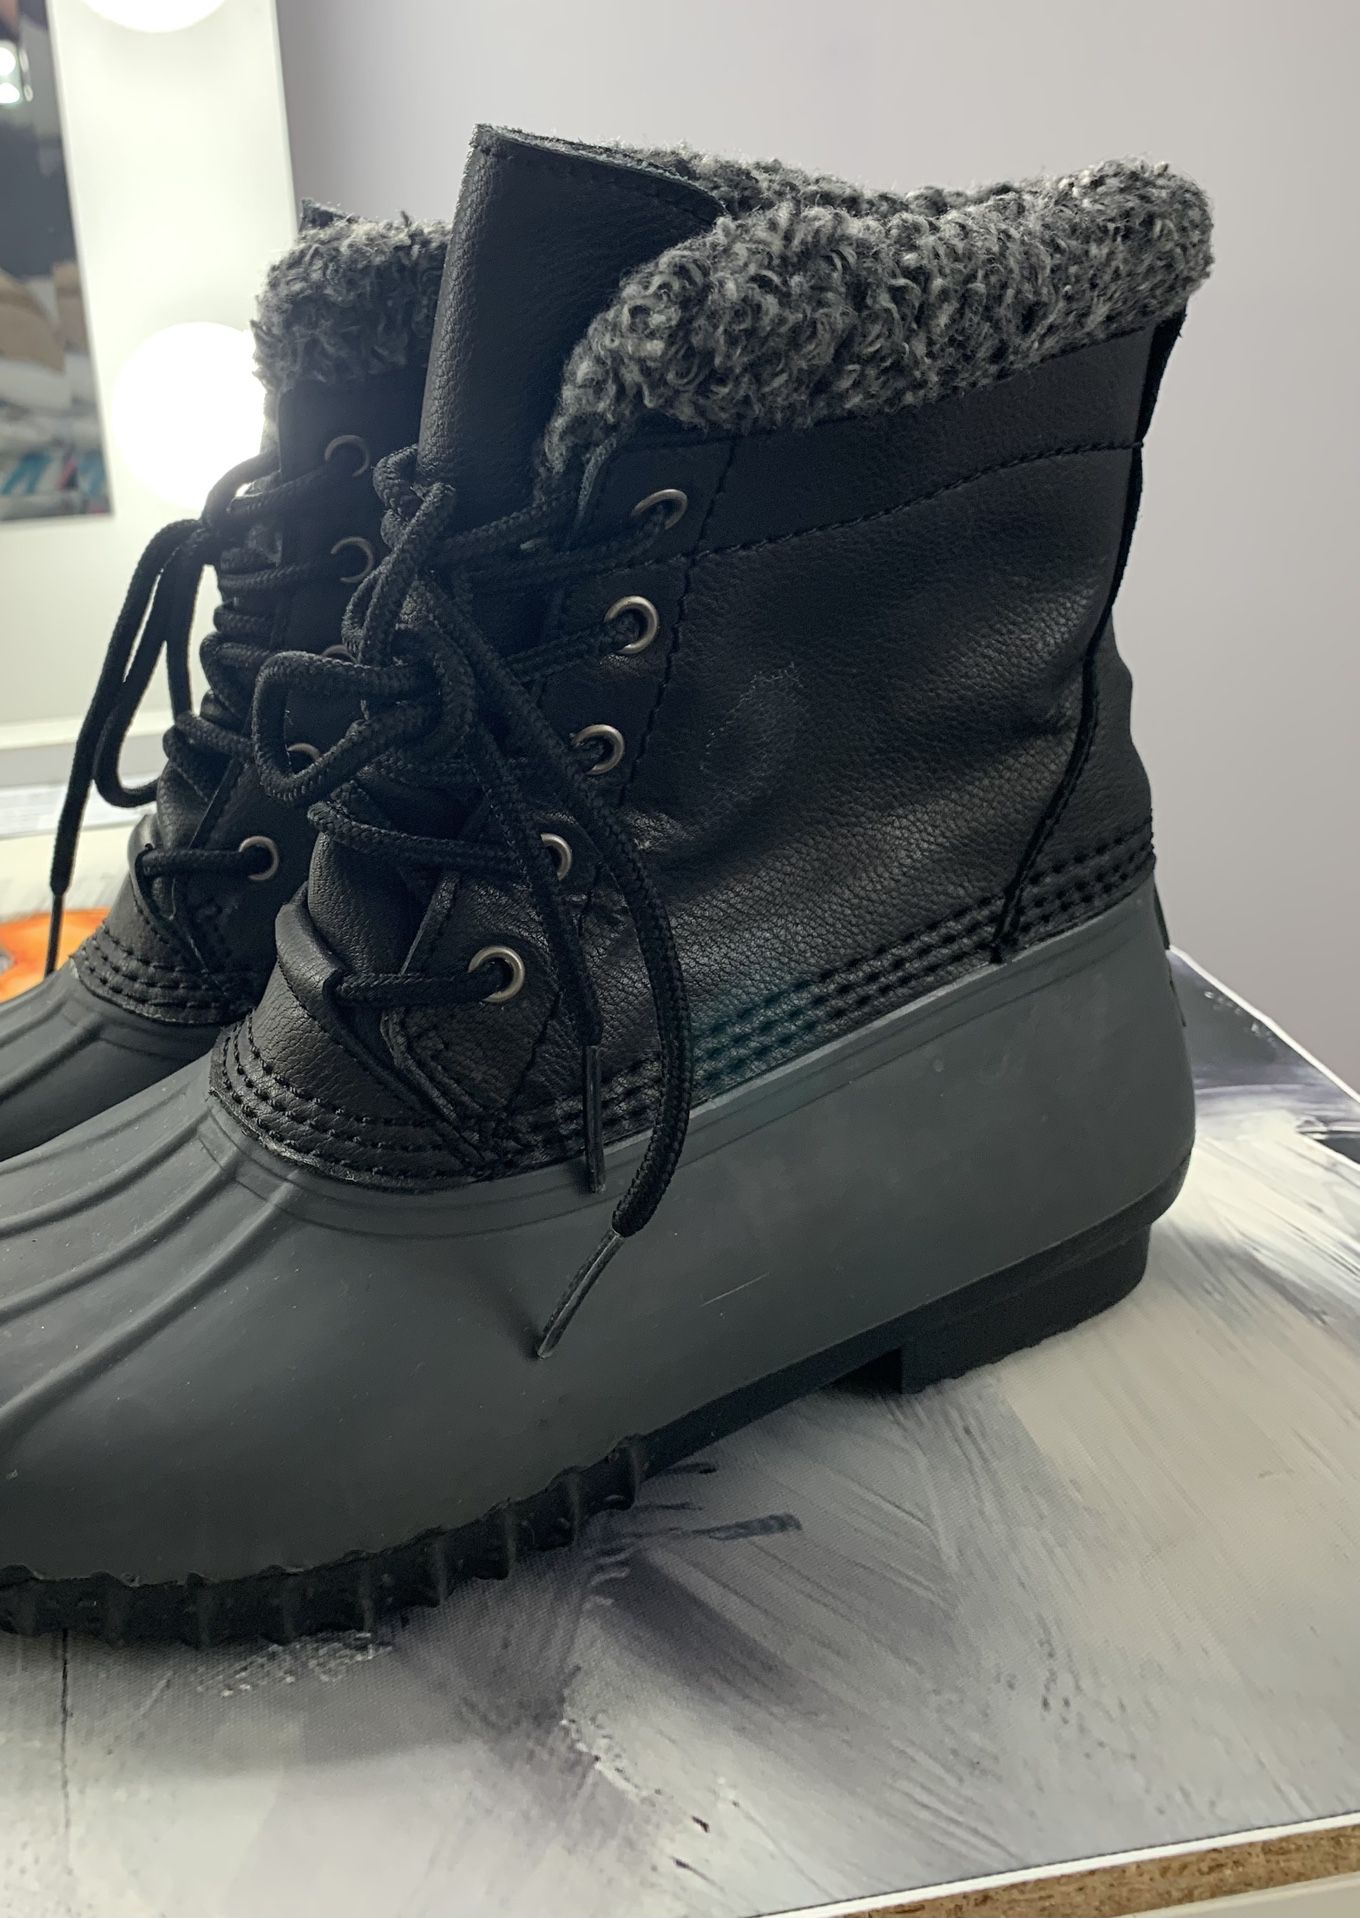 AMERICAN EAGLE SNOW BOOTS SIZE 7 